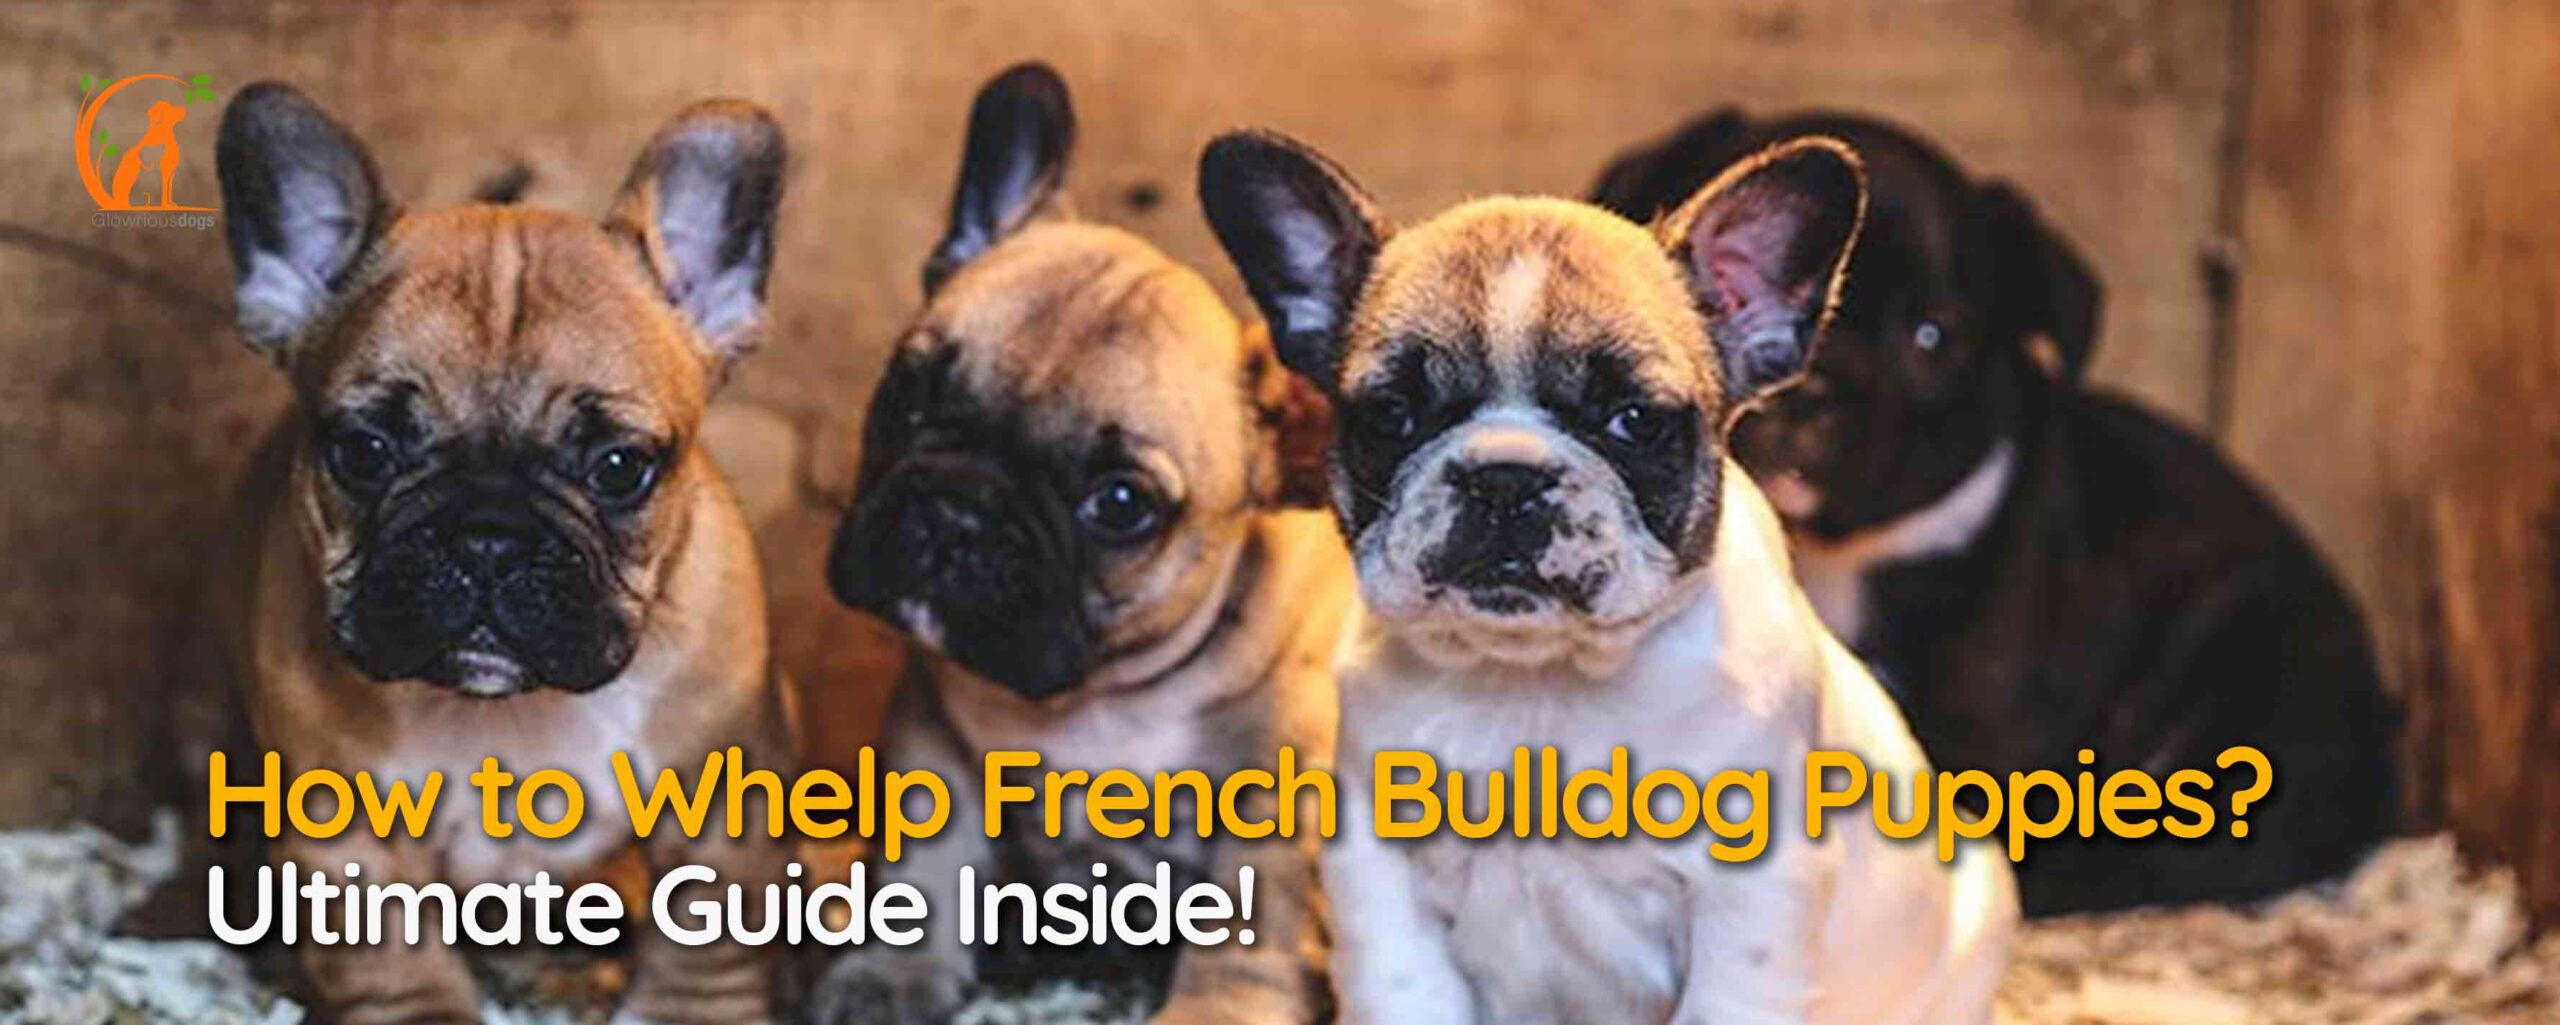 How to Whelp French Bulldog Puppies? Ultimate Guide Inside!